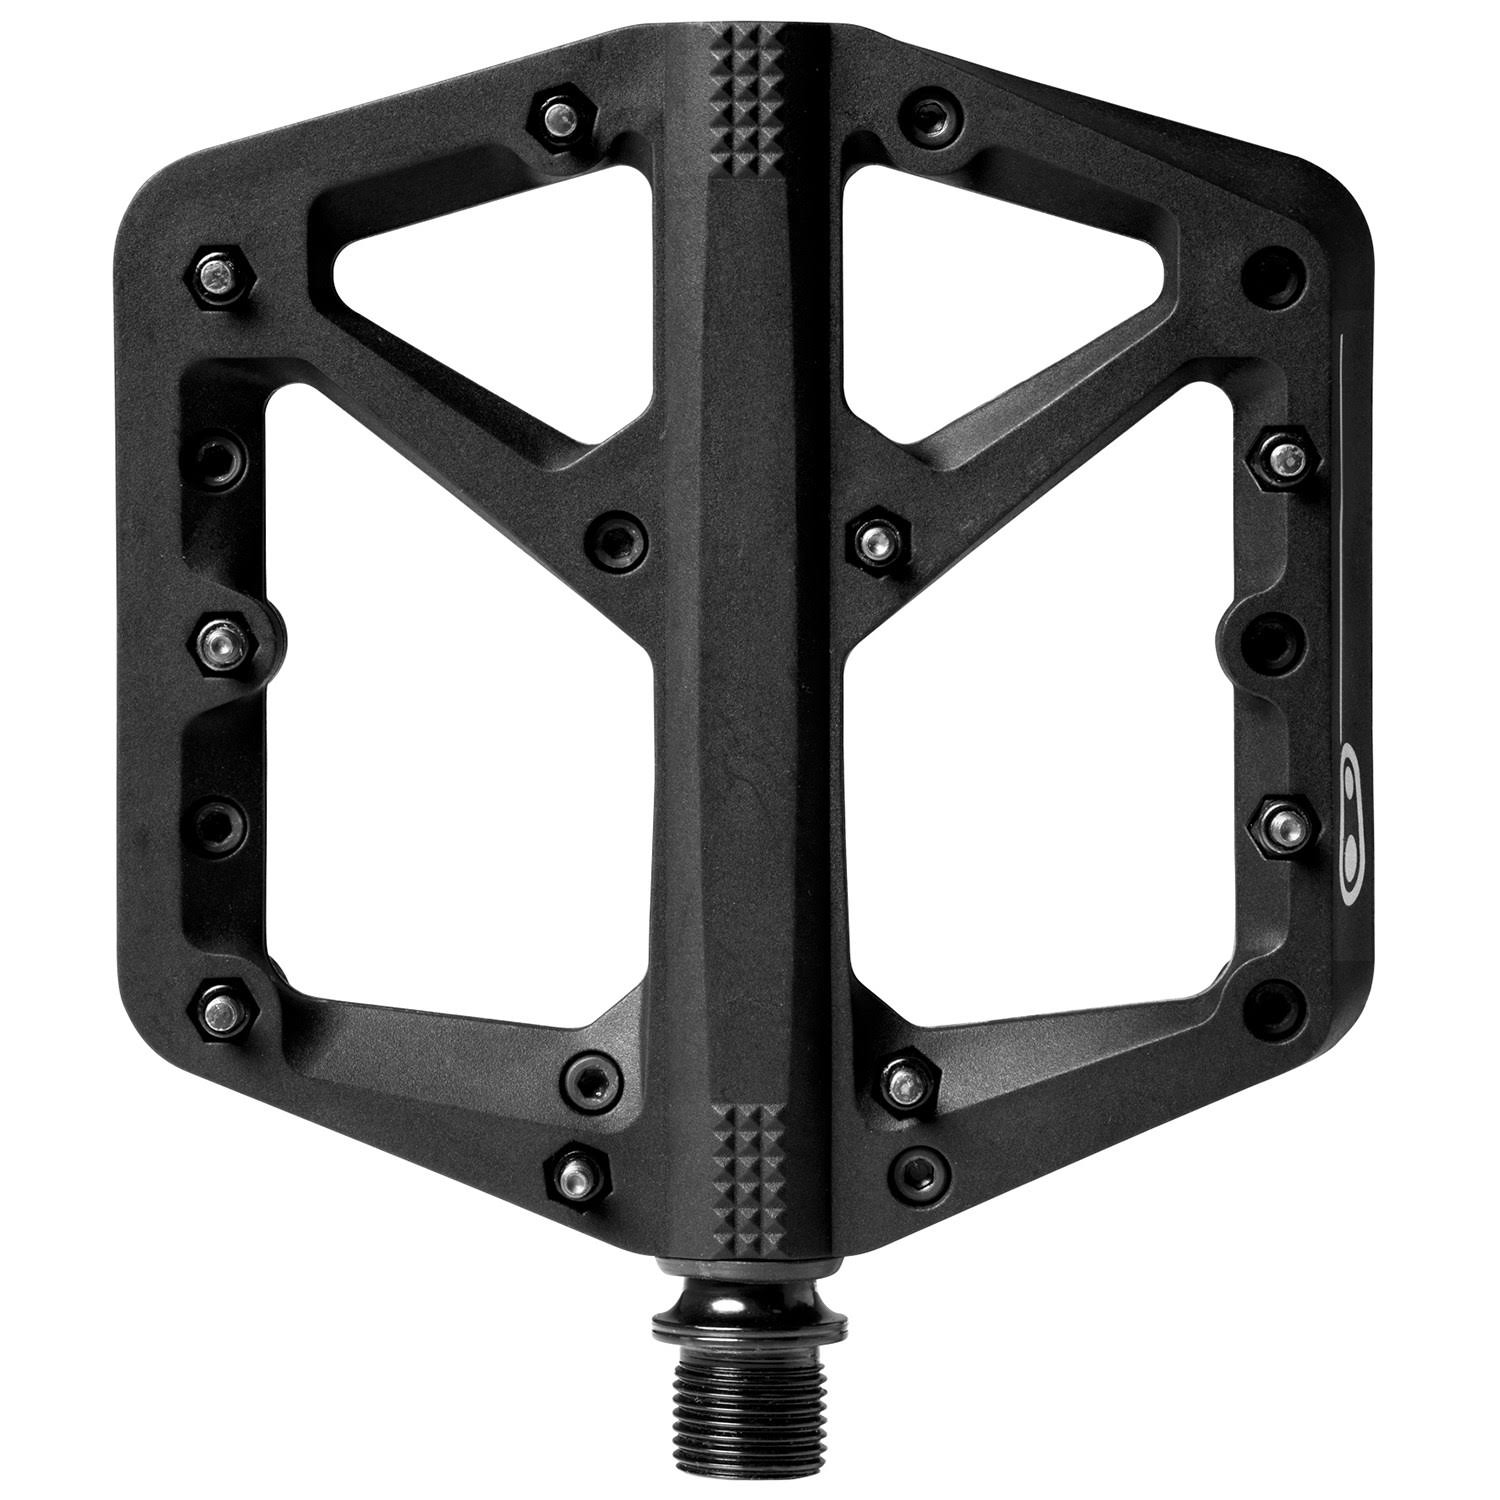 Crank Brothers Stamp 1 Pedals - Black, Small